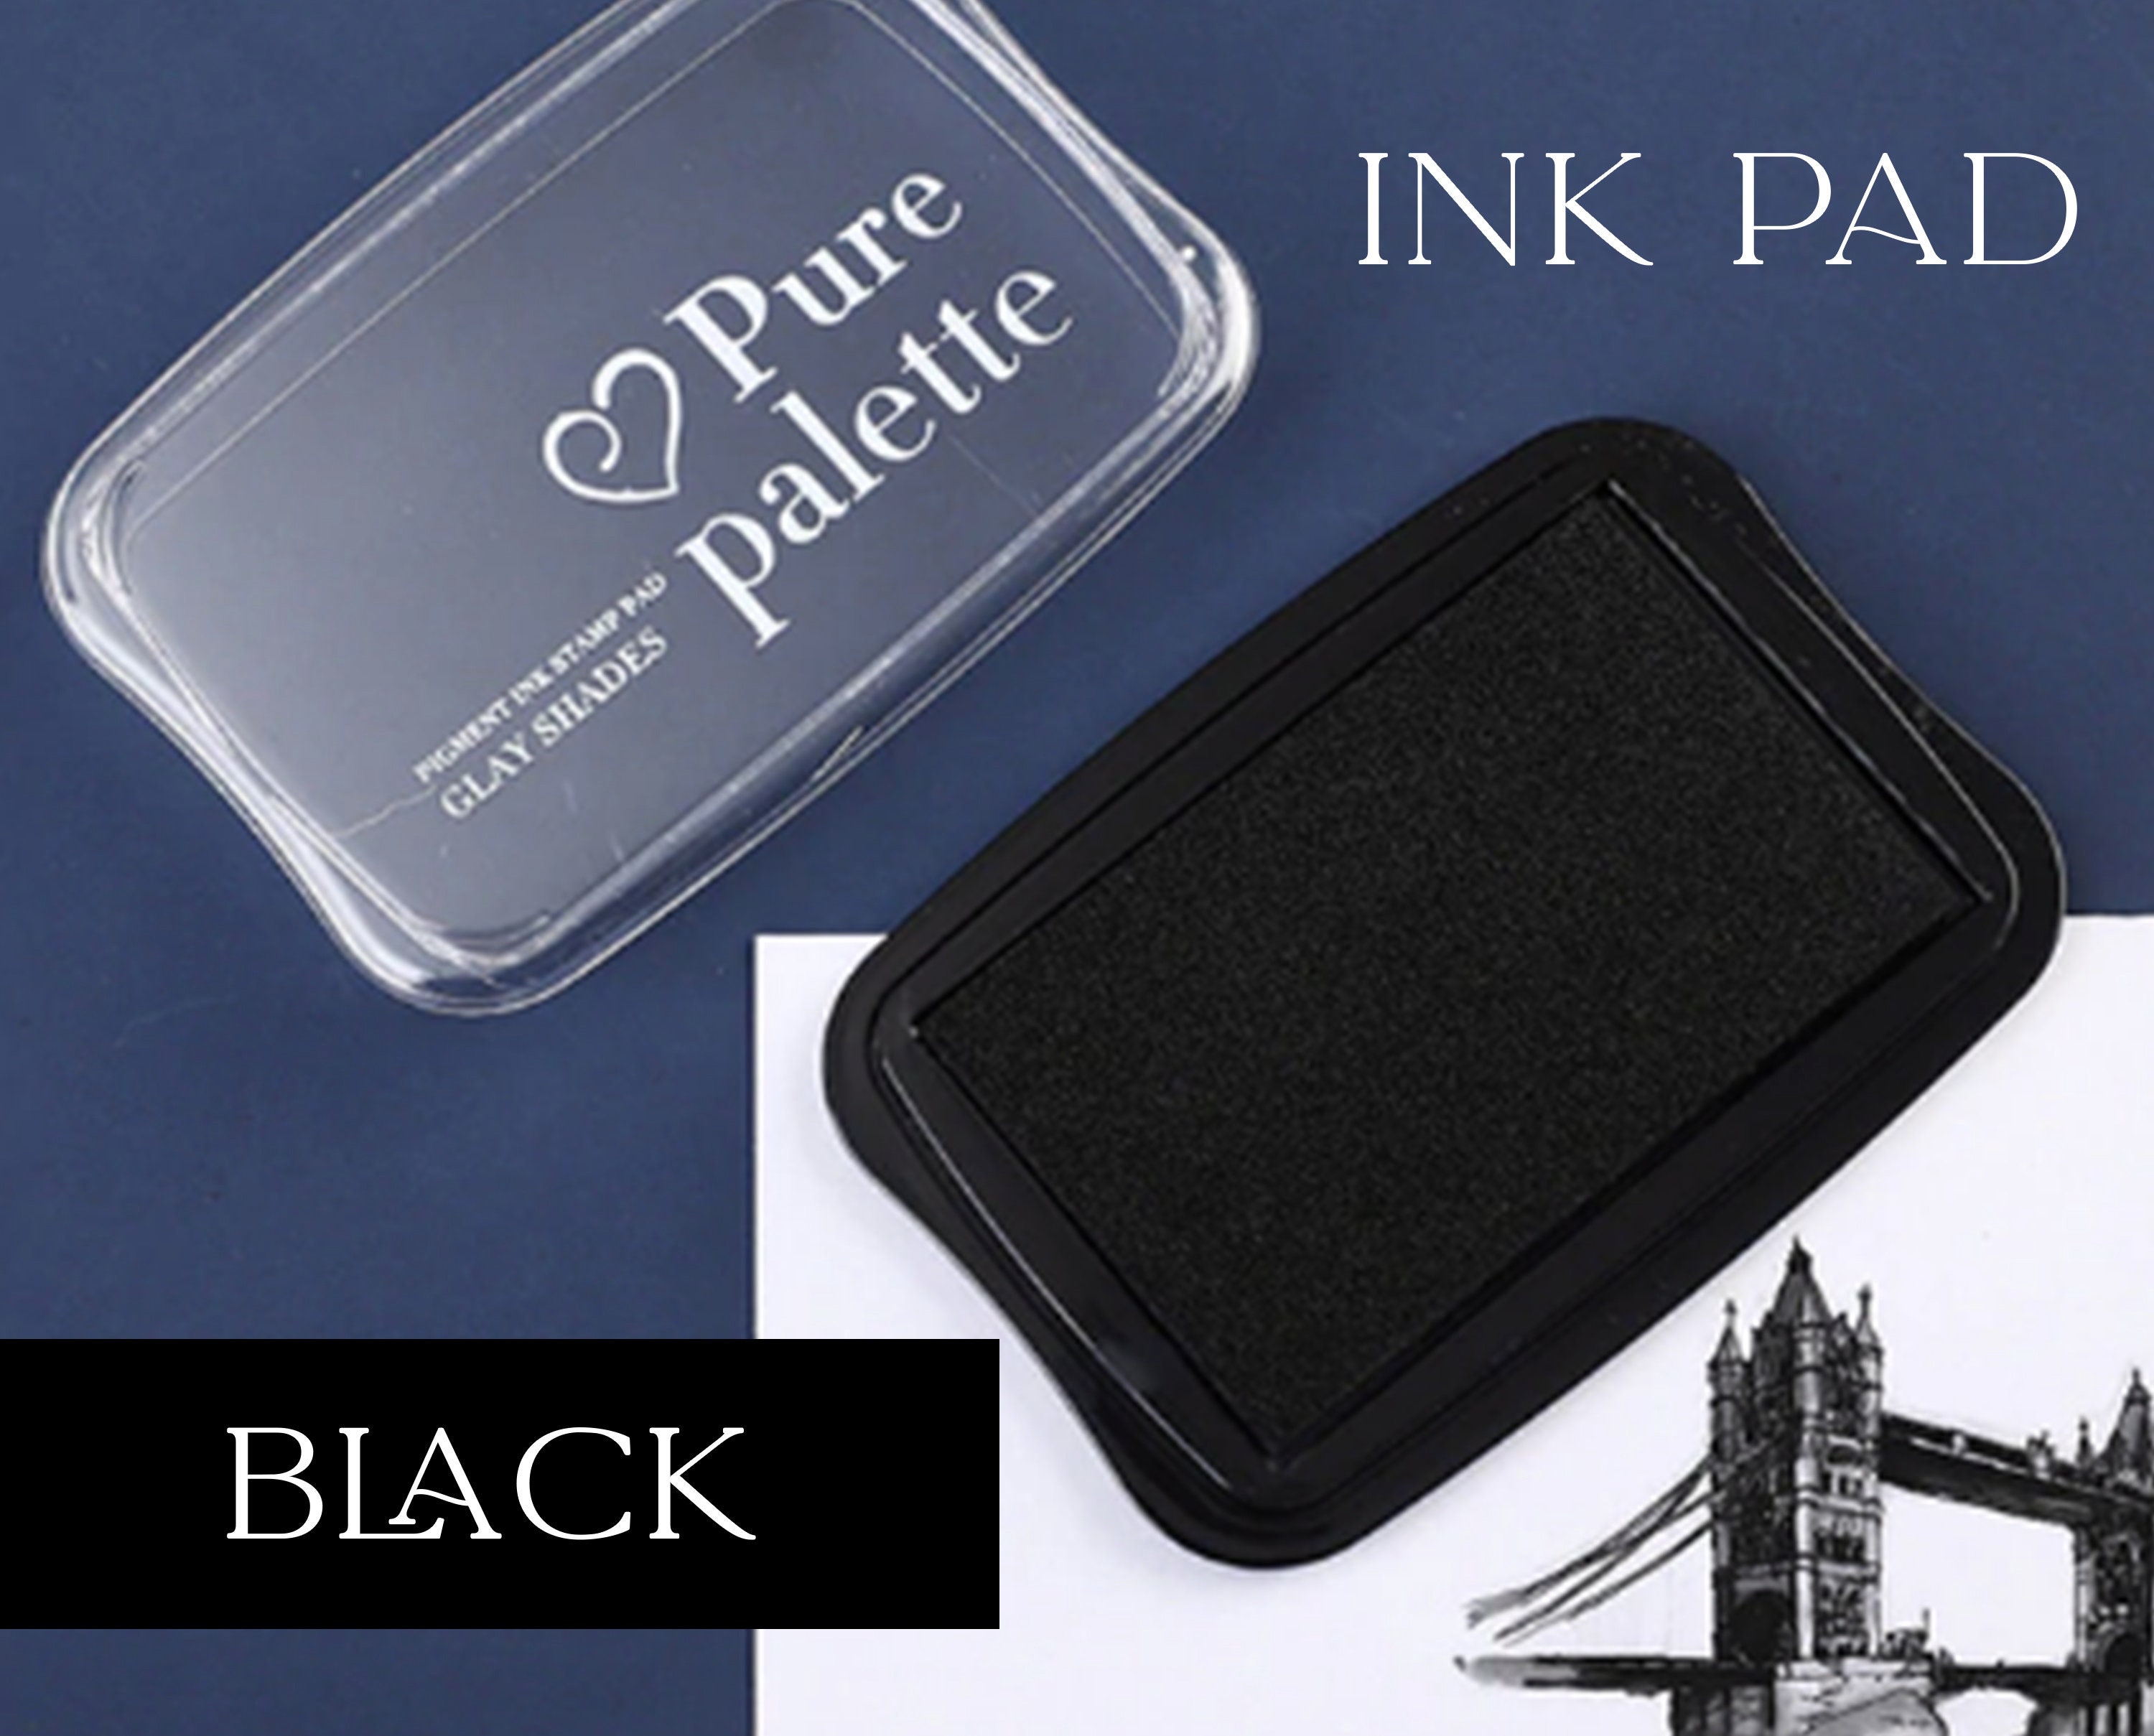 WHITE INK PAD, Rubber Stamp Ink Pad, Ink Pads, Stamp Pad, Pad for Wood Stamp,  White Ink to Reload Ink Pads, White Ink 